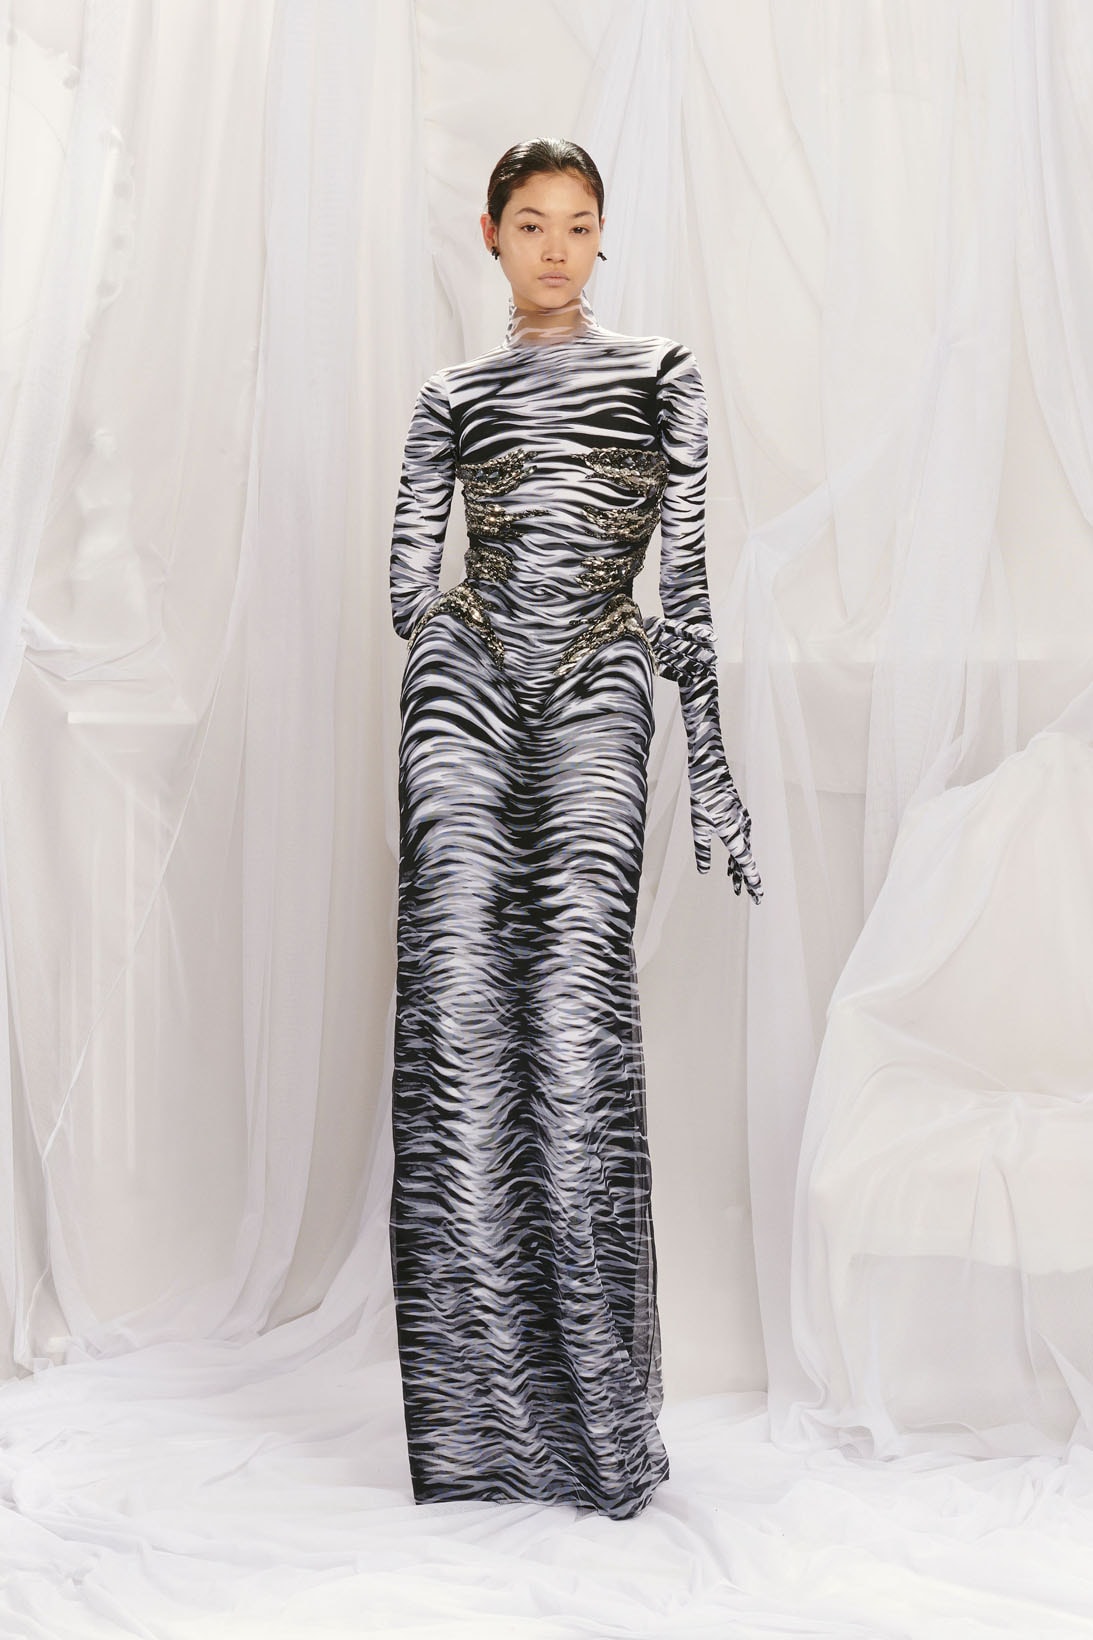 Jean Paul Gaultier Haute Couture Spring Glenn Martens Takeover Collection Images